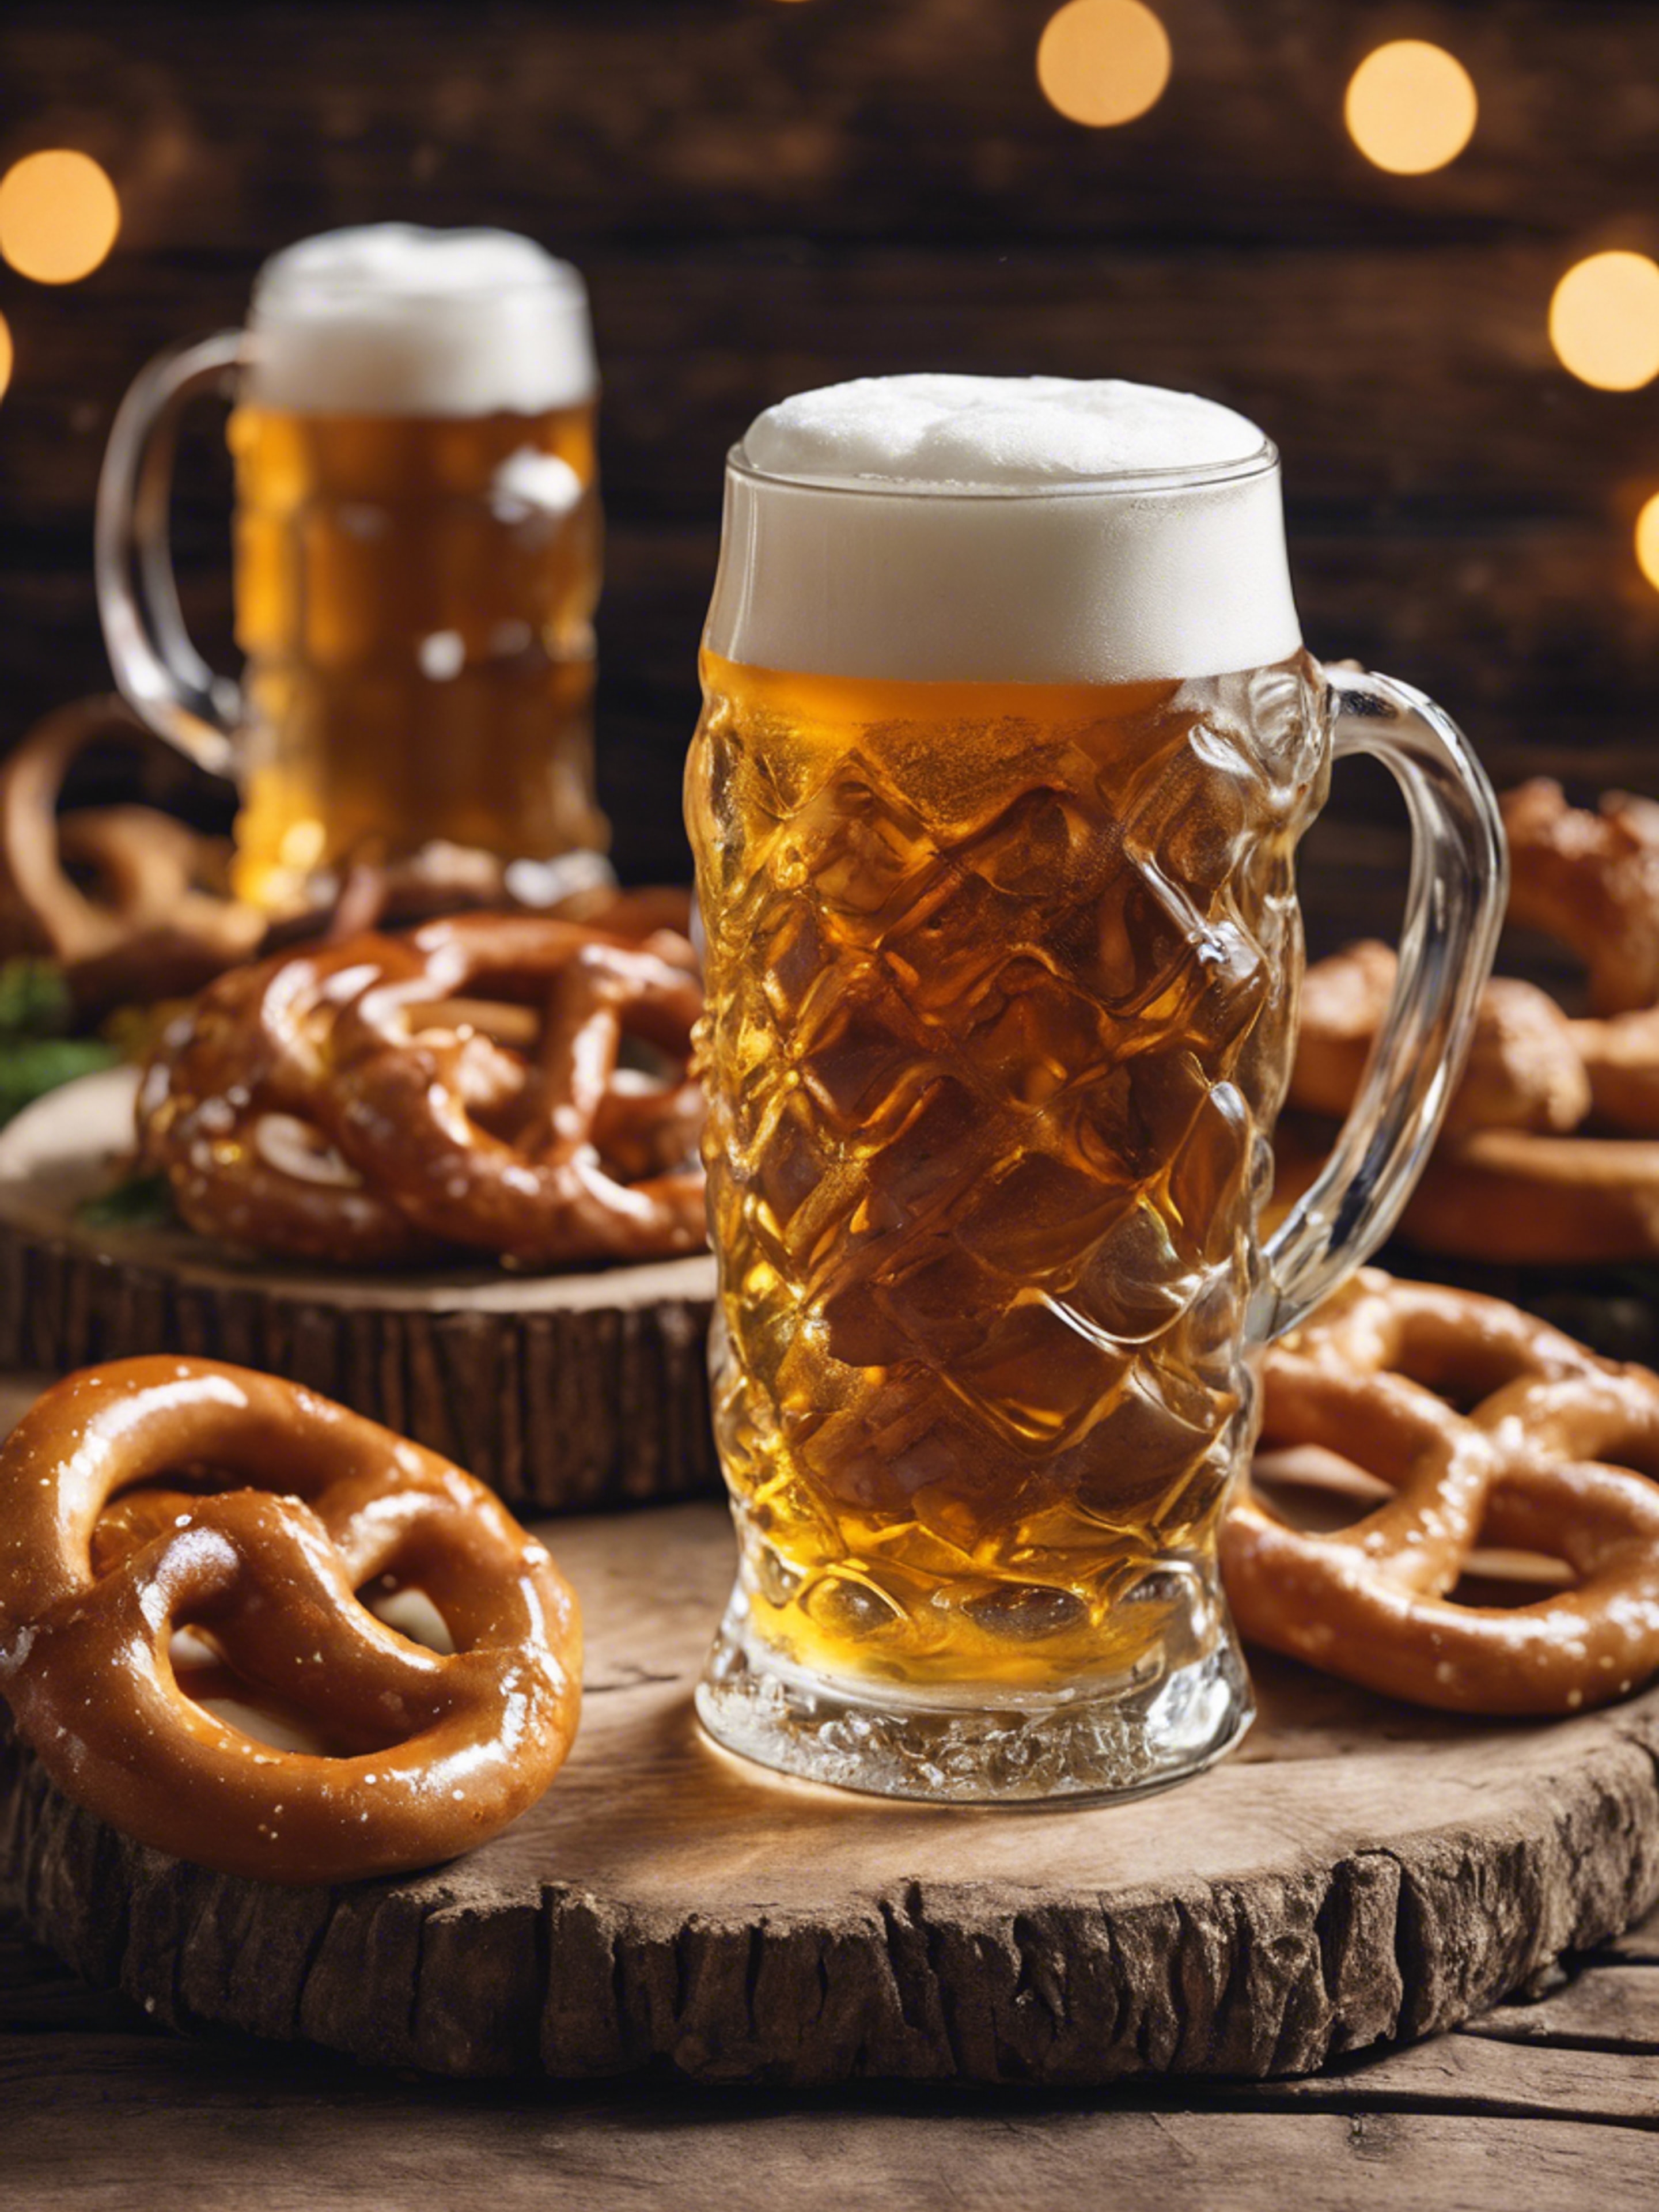 A foamy German beer, pretzels, and other Oktoberfest traditional foods on a rustic wooden table. Tapeta na zeď[8867ca72213c4237bd6d]